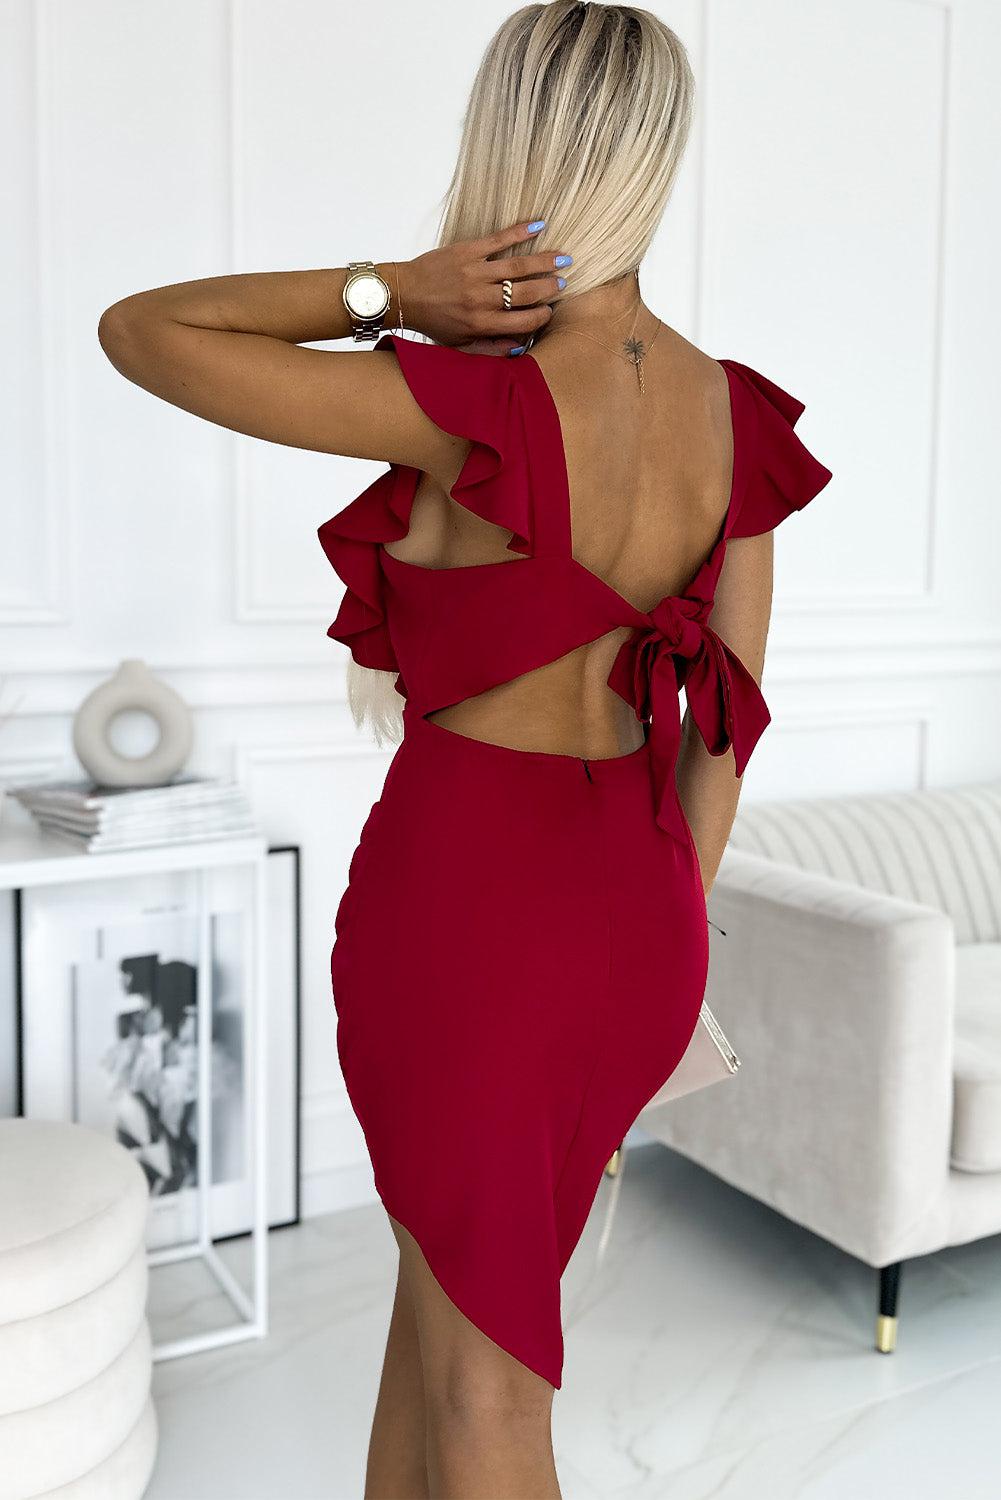 a woman wearing a red dress with a cut out back